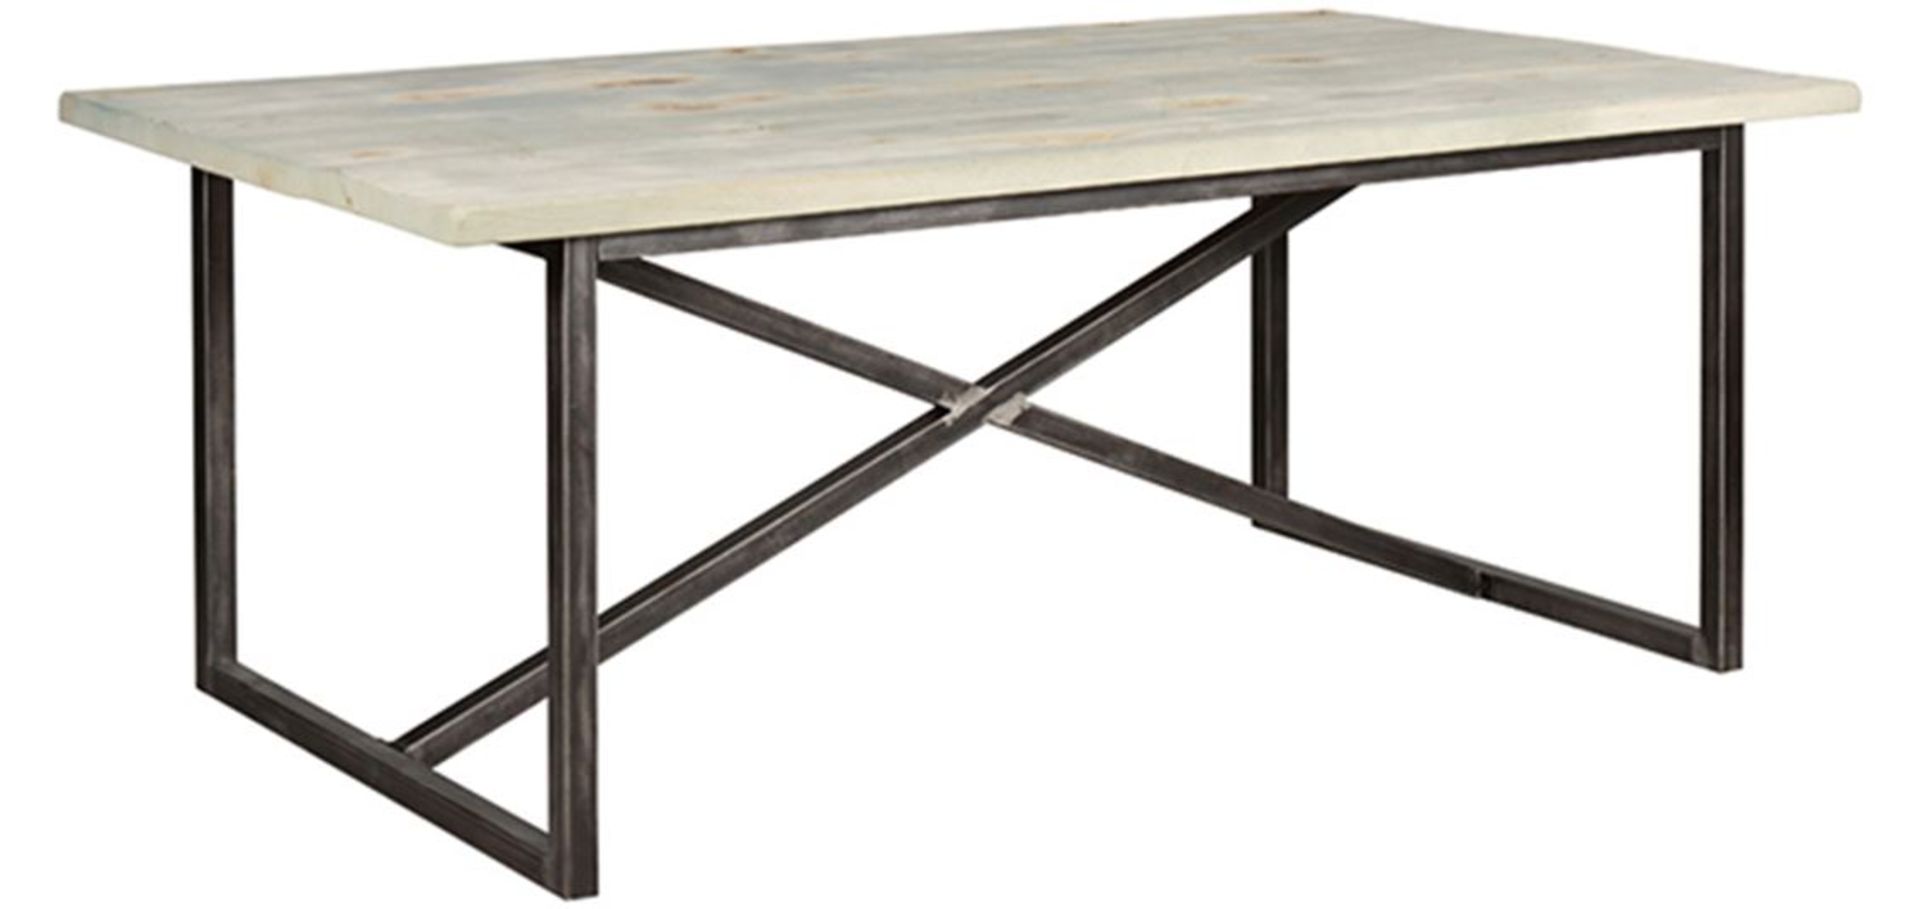 Sandshore Dining Table 195cm Natural 195 x 106 x 76cm RRP £1355 ( Location A7 -724)